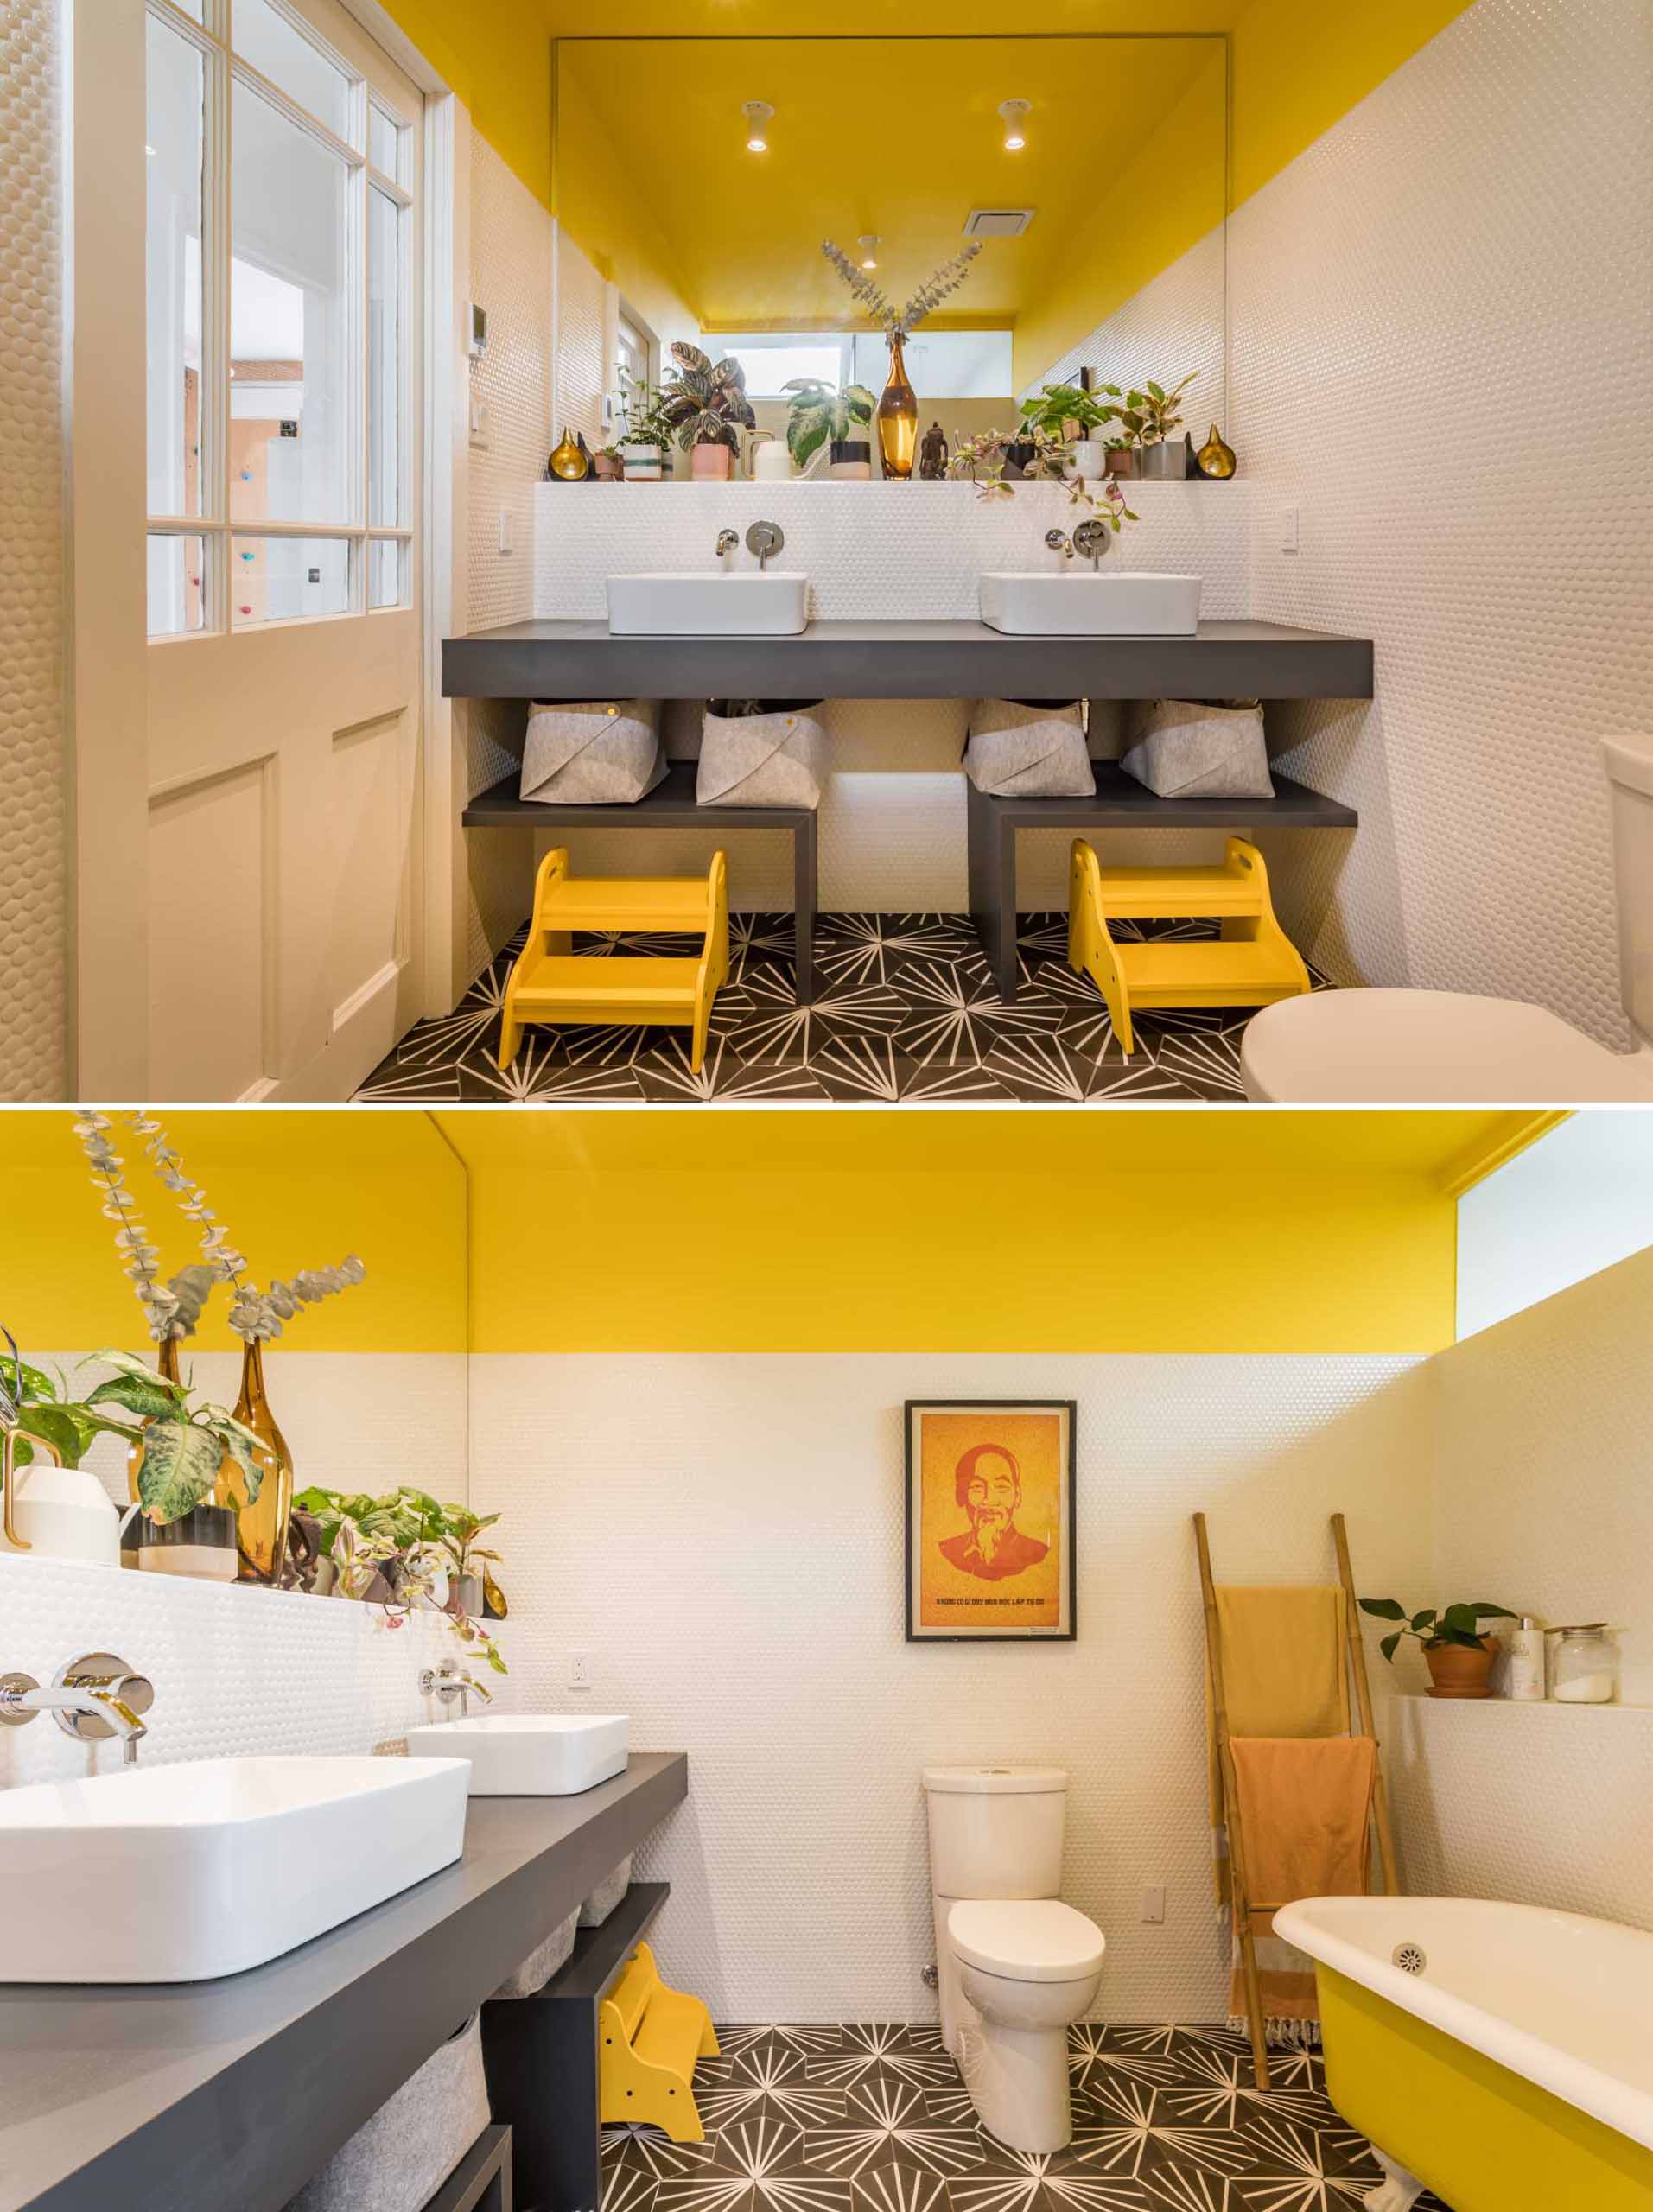 Yellow and white have been c،sen for the color palette of this modern bathroom, while black and white tiles cover the floor.